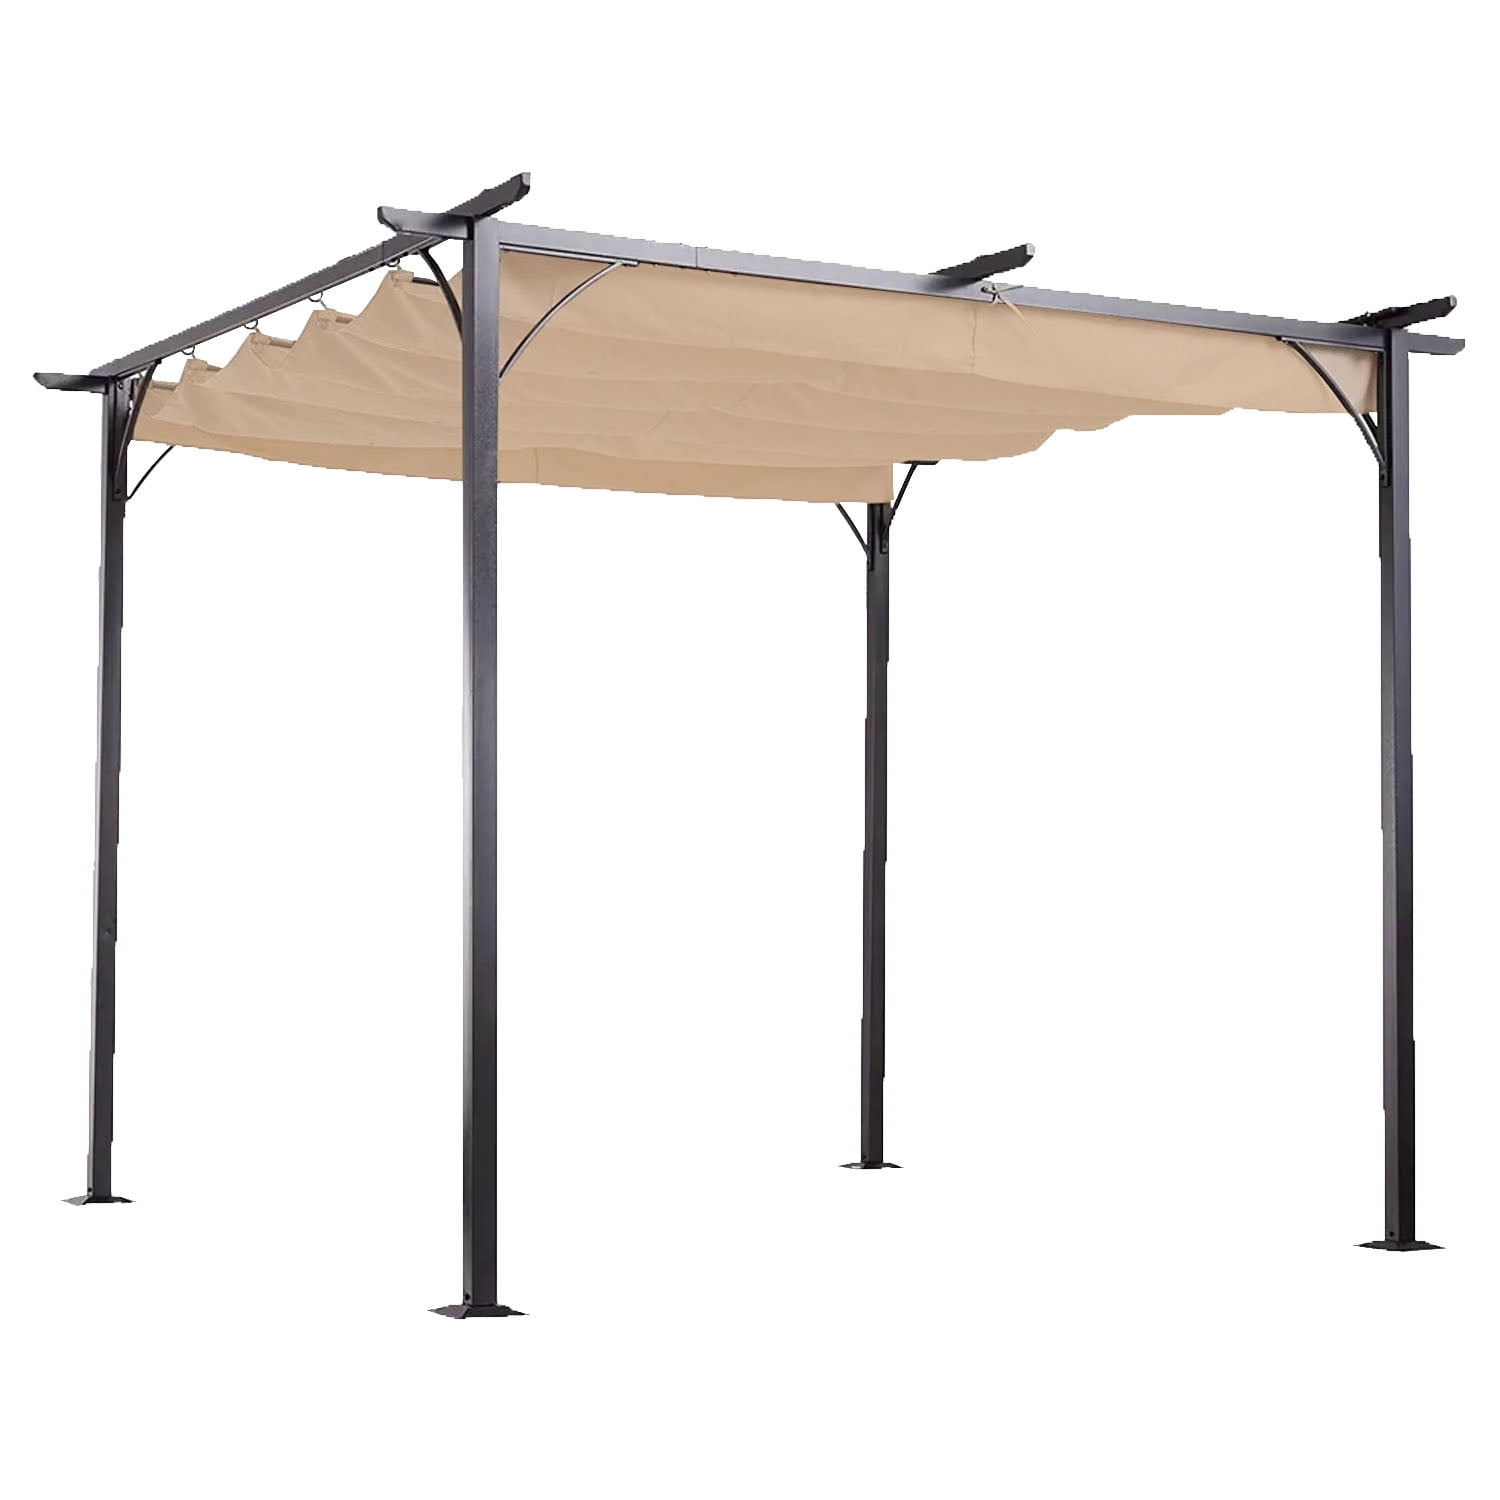 Clearance Sale Outsunny 10/' x 10/' Gazebo Canopy Replacement UV Protected Sun